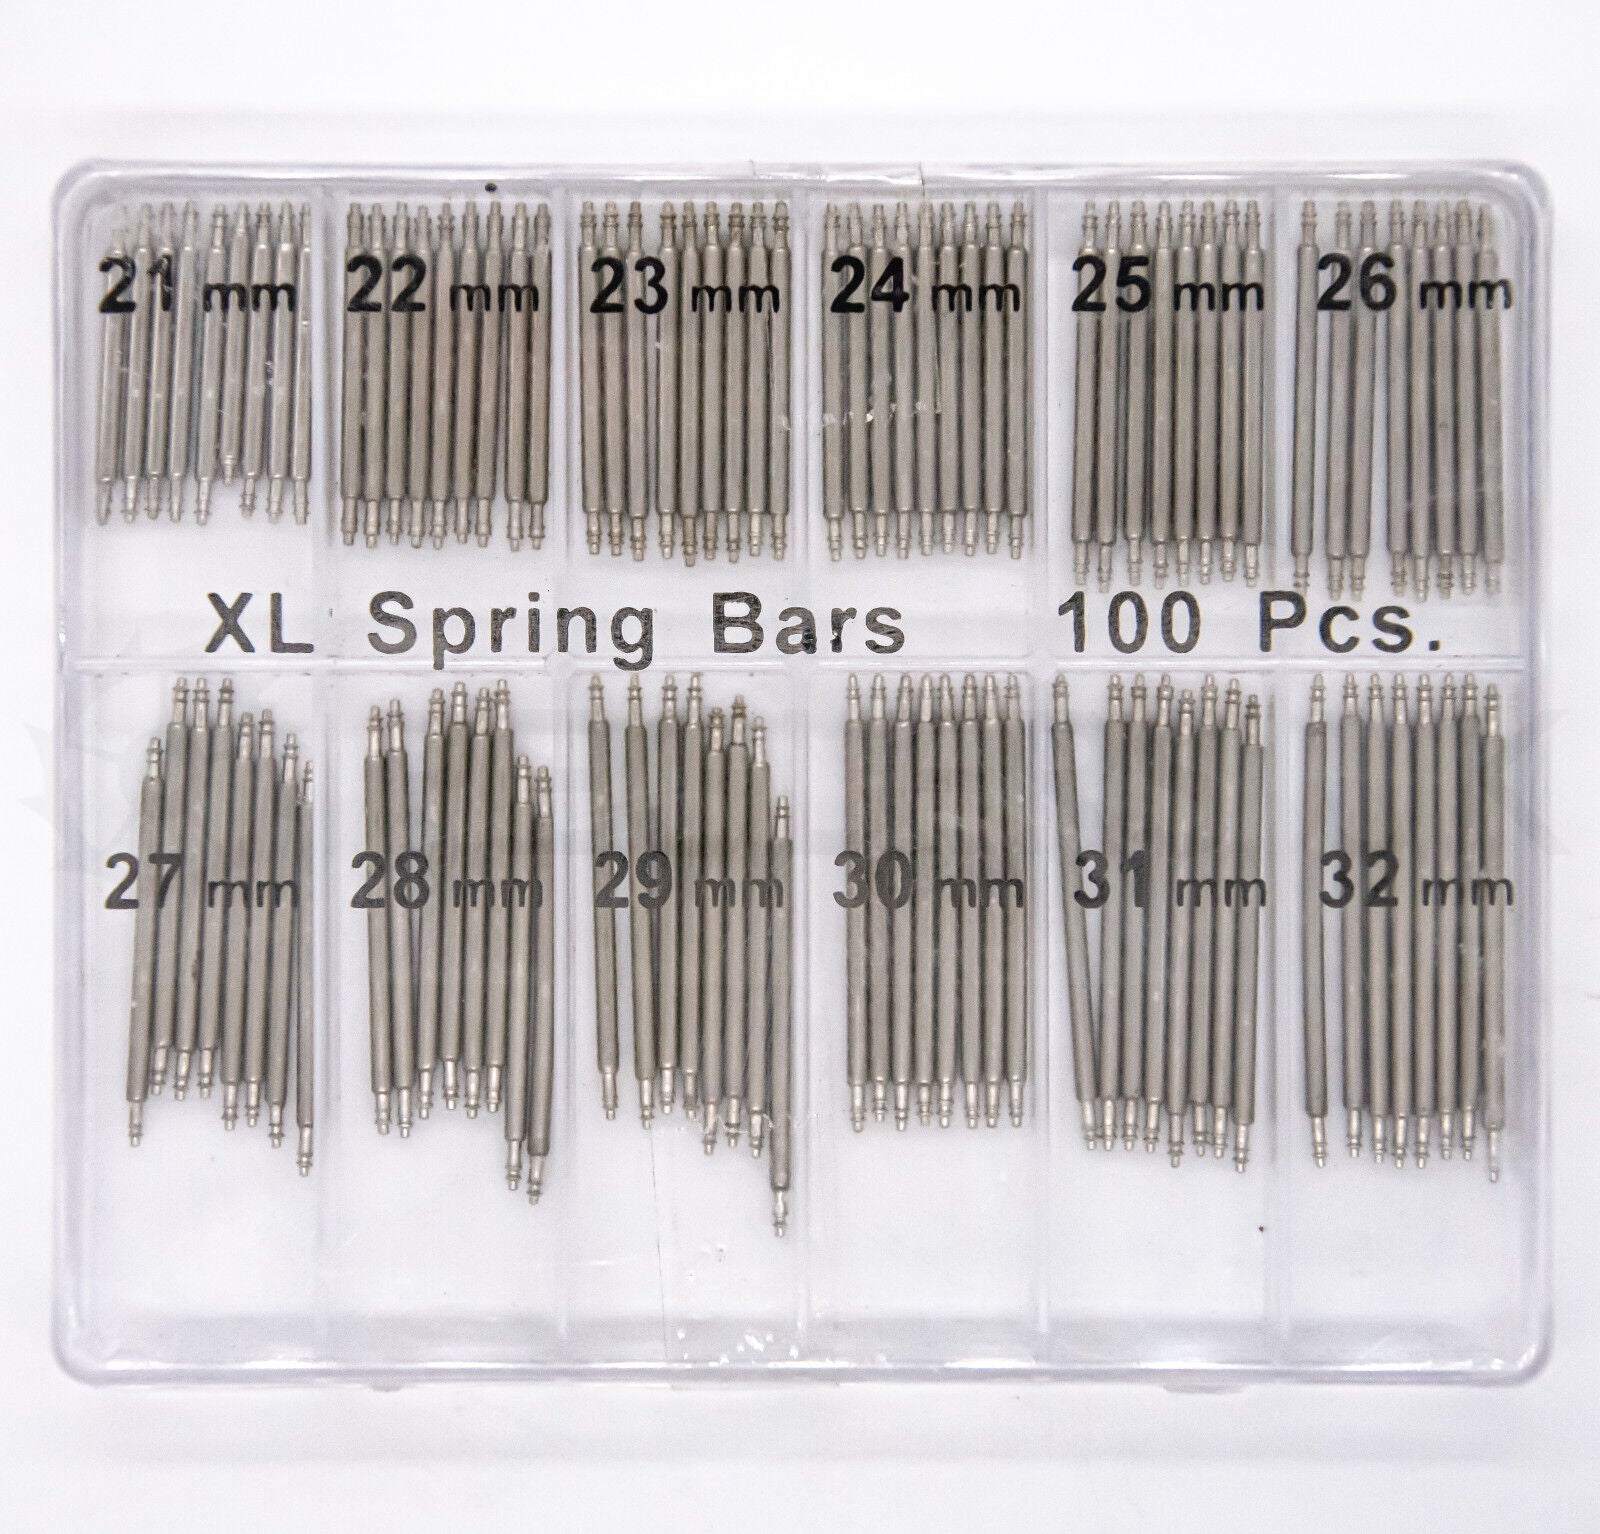 Spring Bars, Double Flange, Sizes: 21mm to 32mm